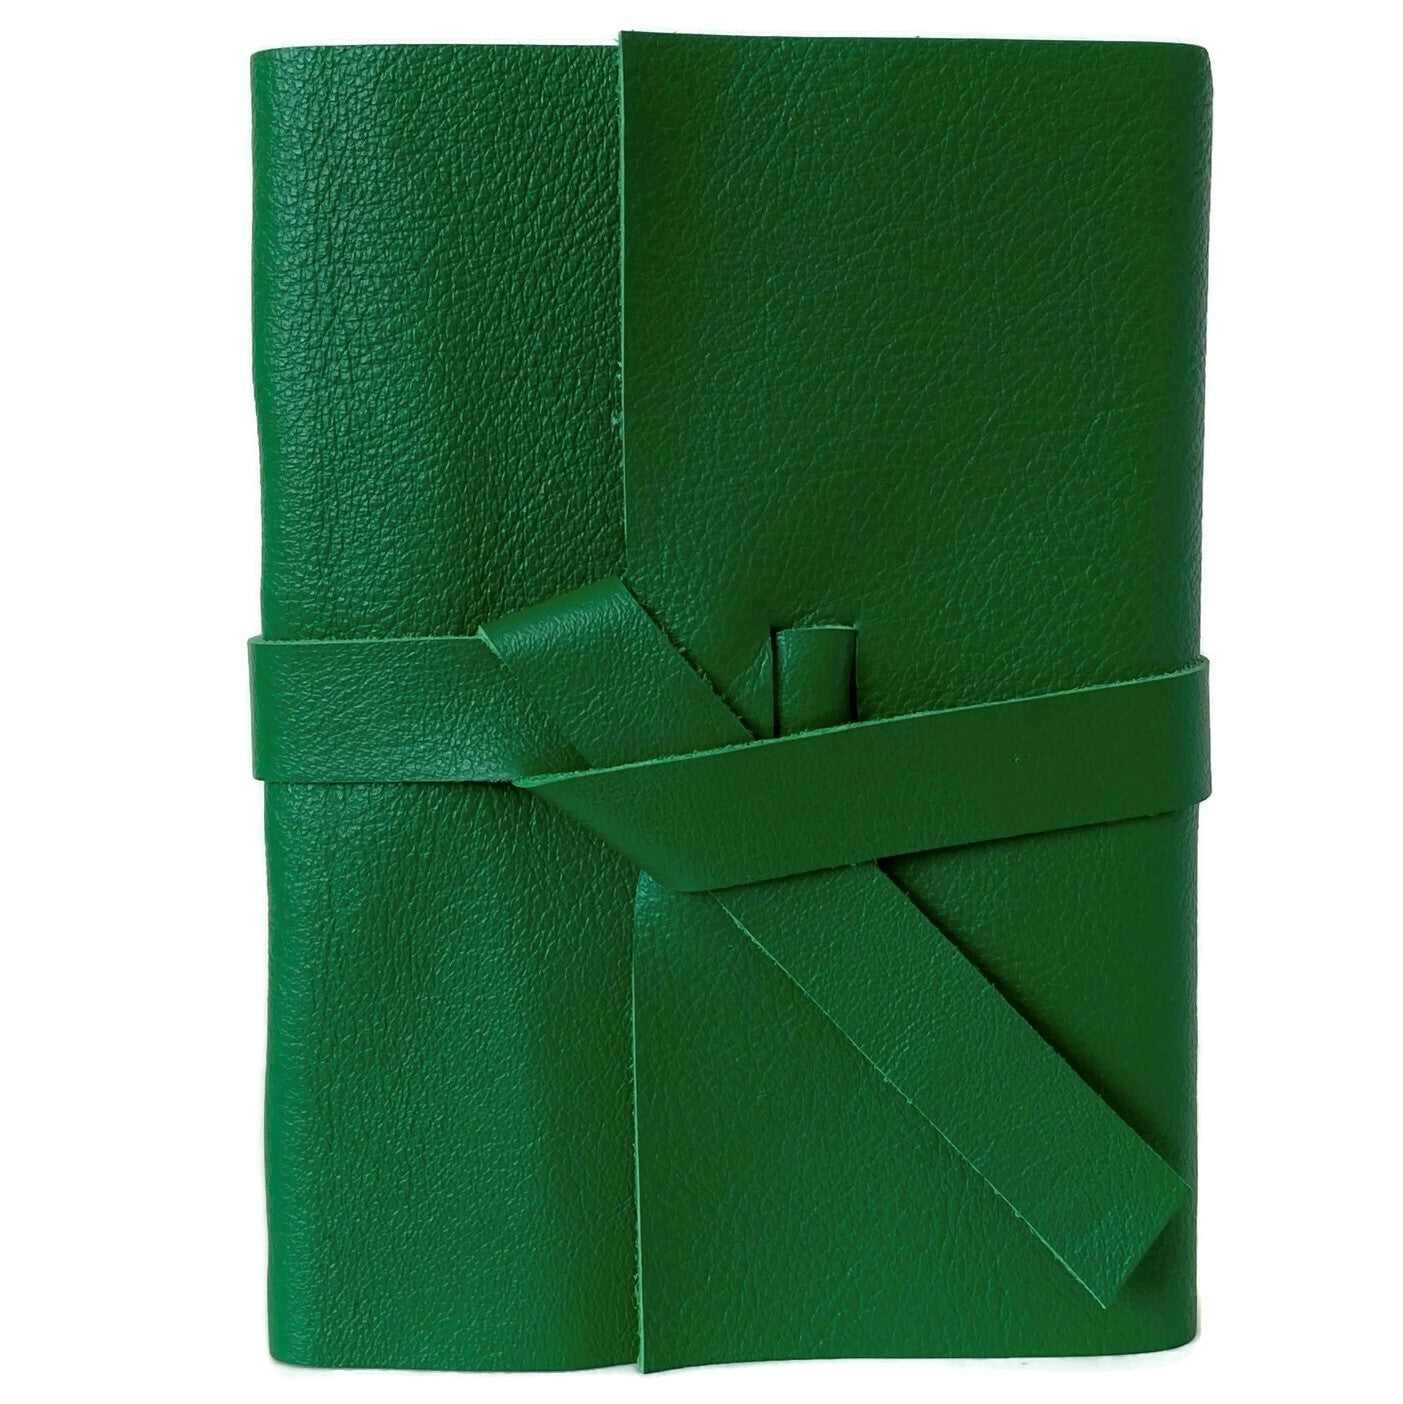 handmade Emerald green leather sketchbook front view